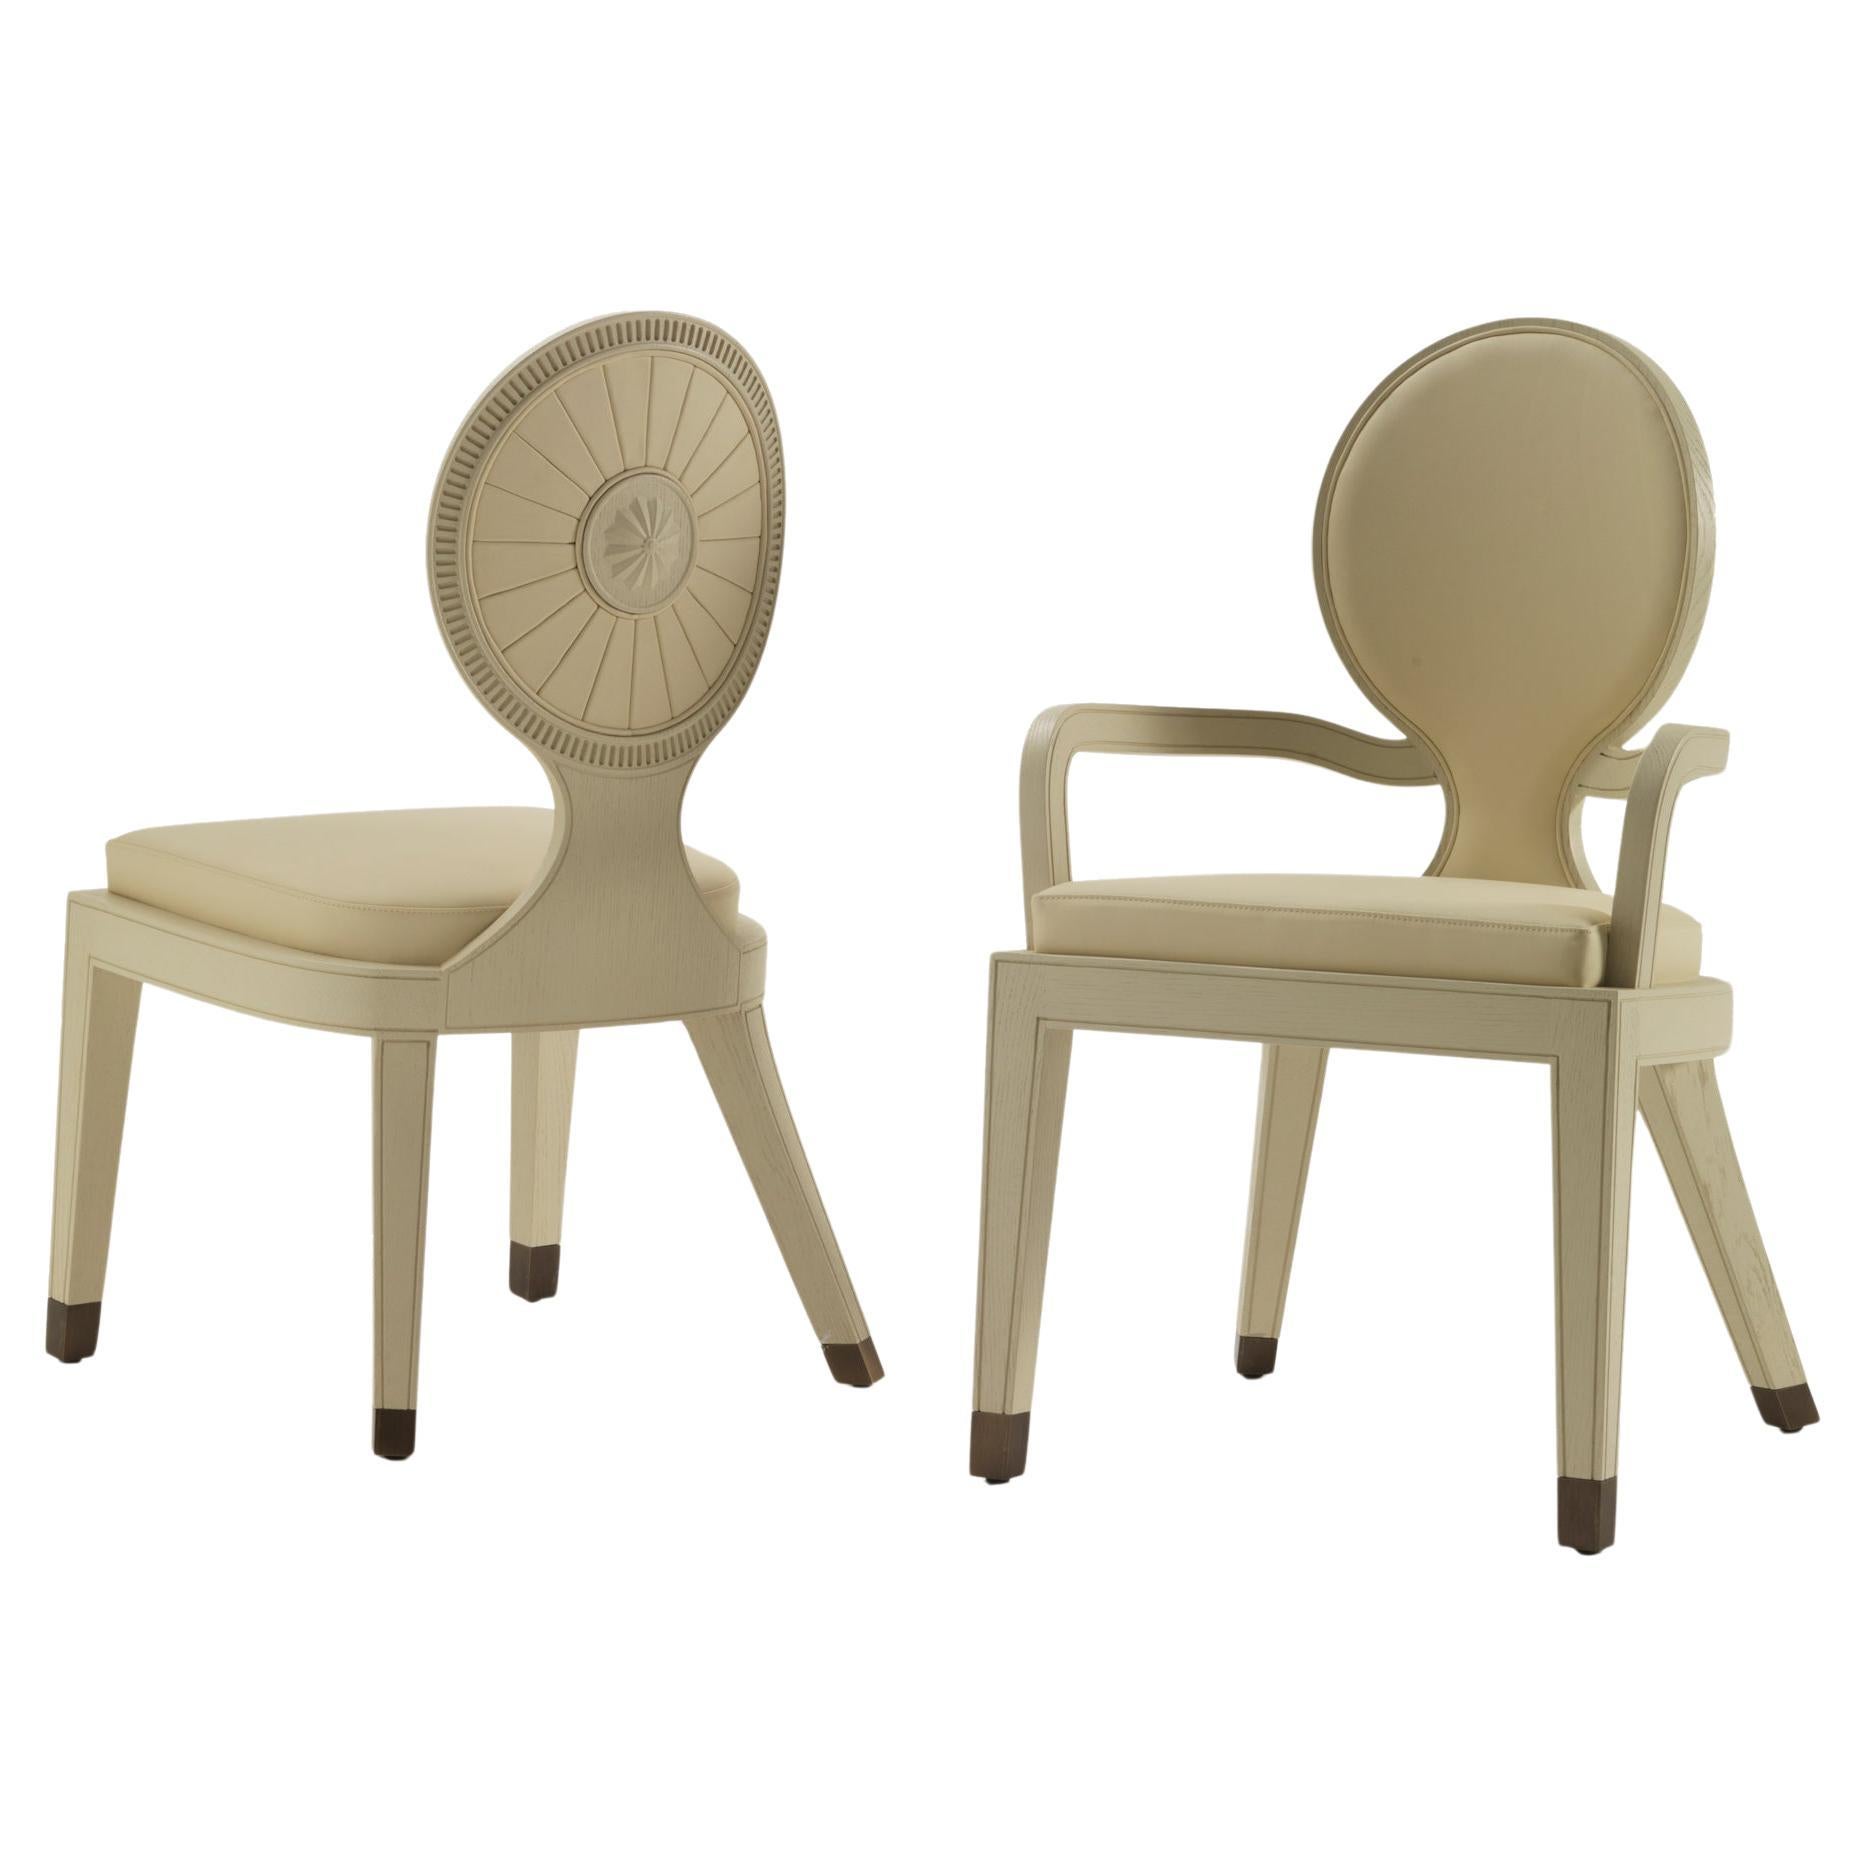 Moon&Sun Cream Wooden Chair with Leather - Oak Wood decorations and brass tips For Sale